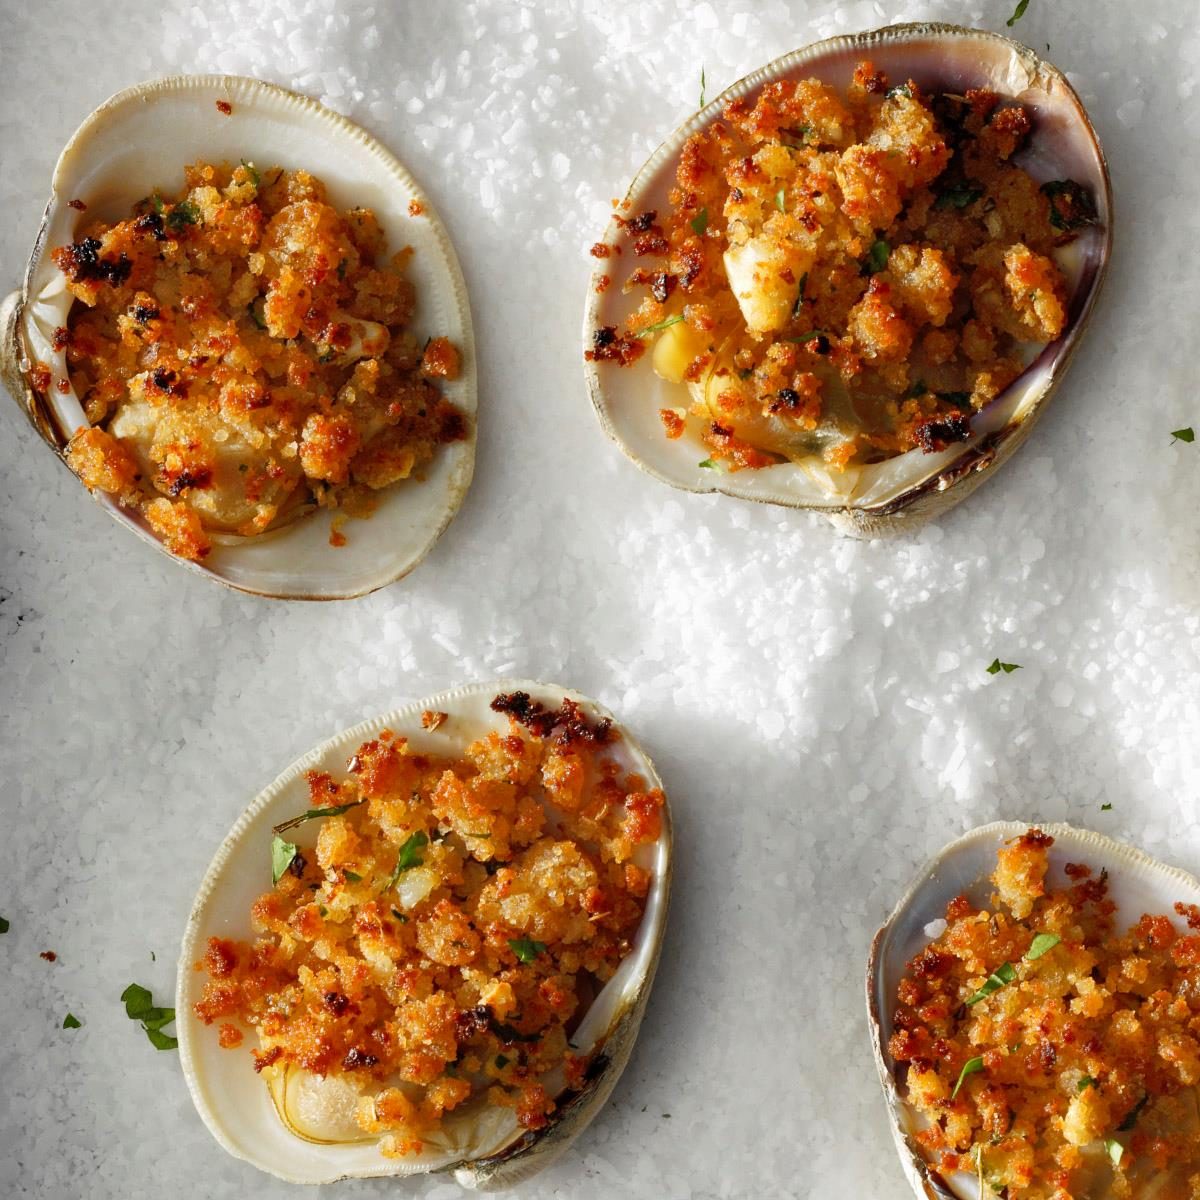 https://www.tasteofhome.com/wp-content/uploads/2018/01/Crumb-Topped-Clams_EXPS_CIBZ22_138765_DR_12_10_1b.jpg?fit=700%2C1024